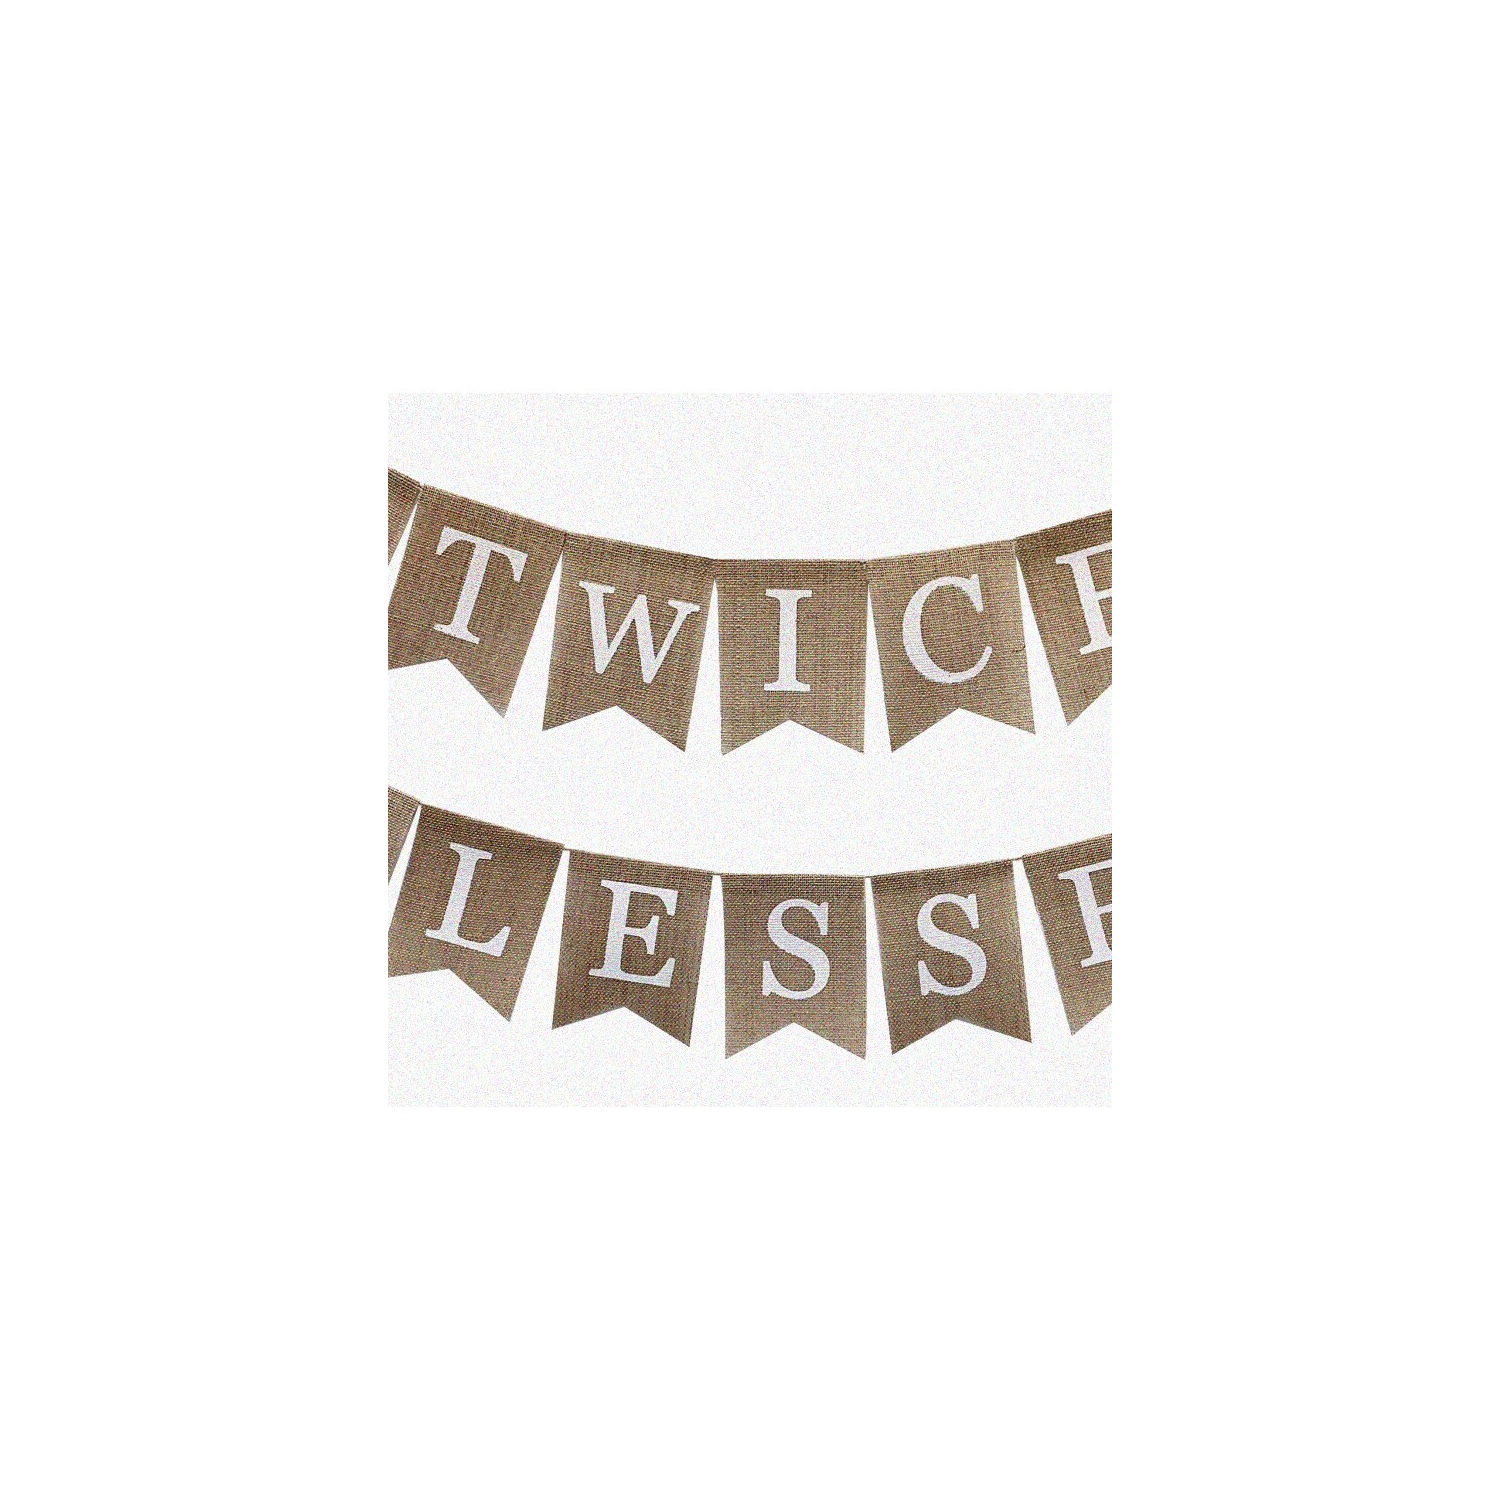 Blessed Twins Rustic Burlap Banner - Perfect Gender Reveal & Baby Shower Decorations! Adorable Twins Photo Prop for Nursery Room - Twin Boys & Girls Party Supplies!